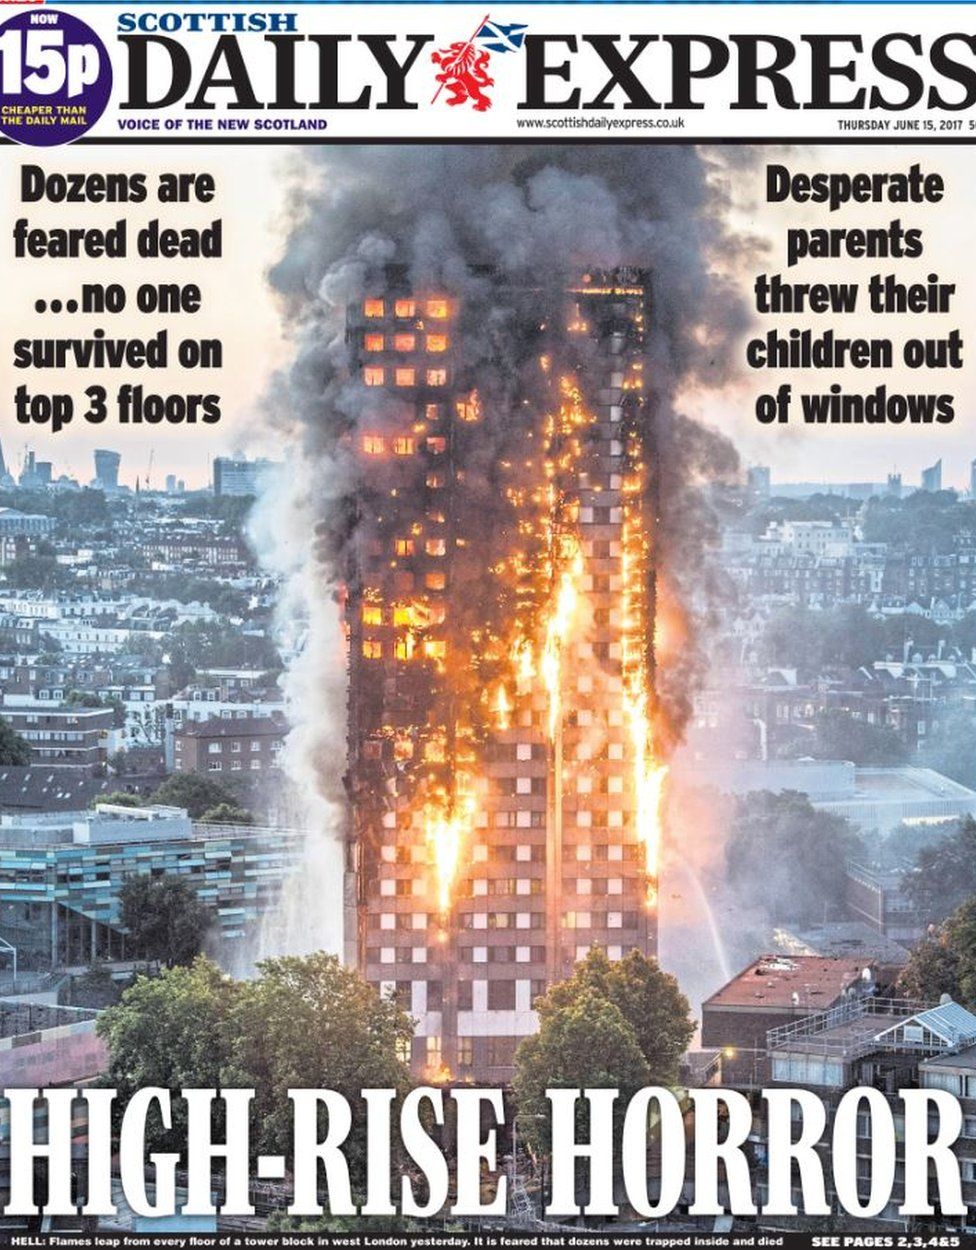 Scotland's papers: High-rise horror - BBC News